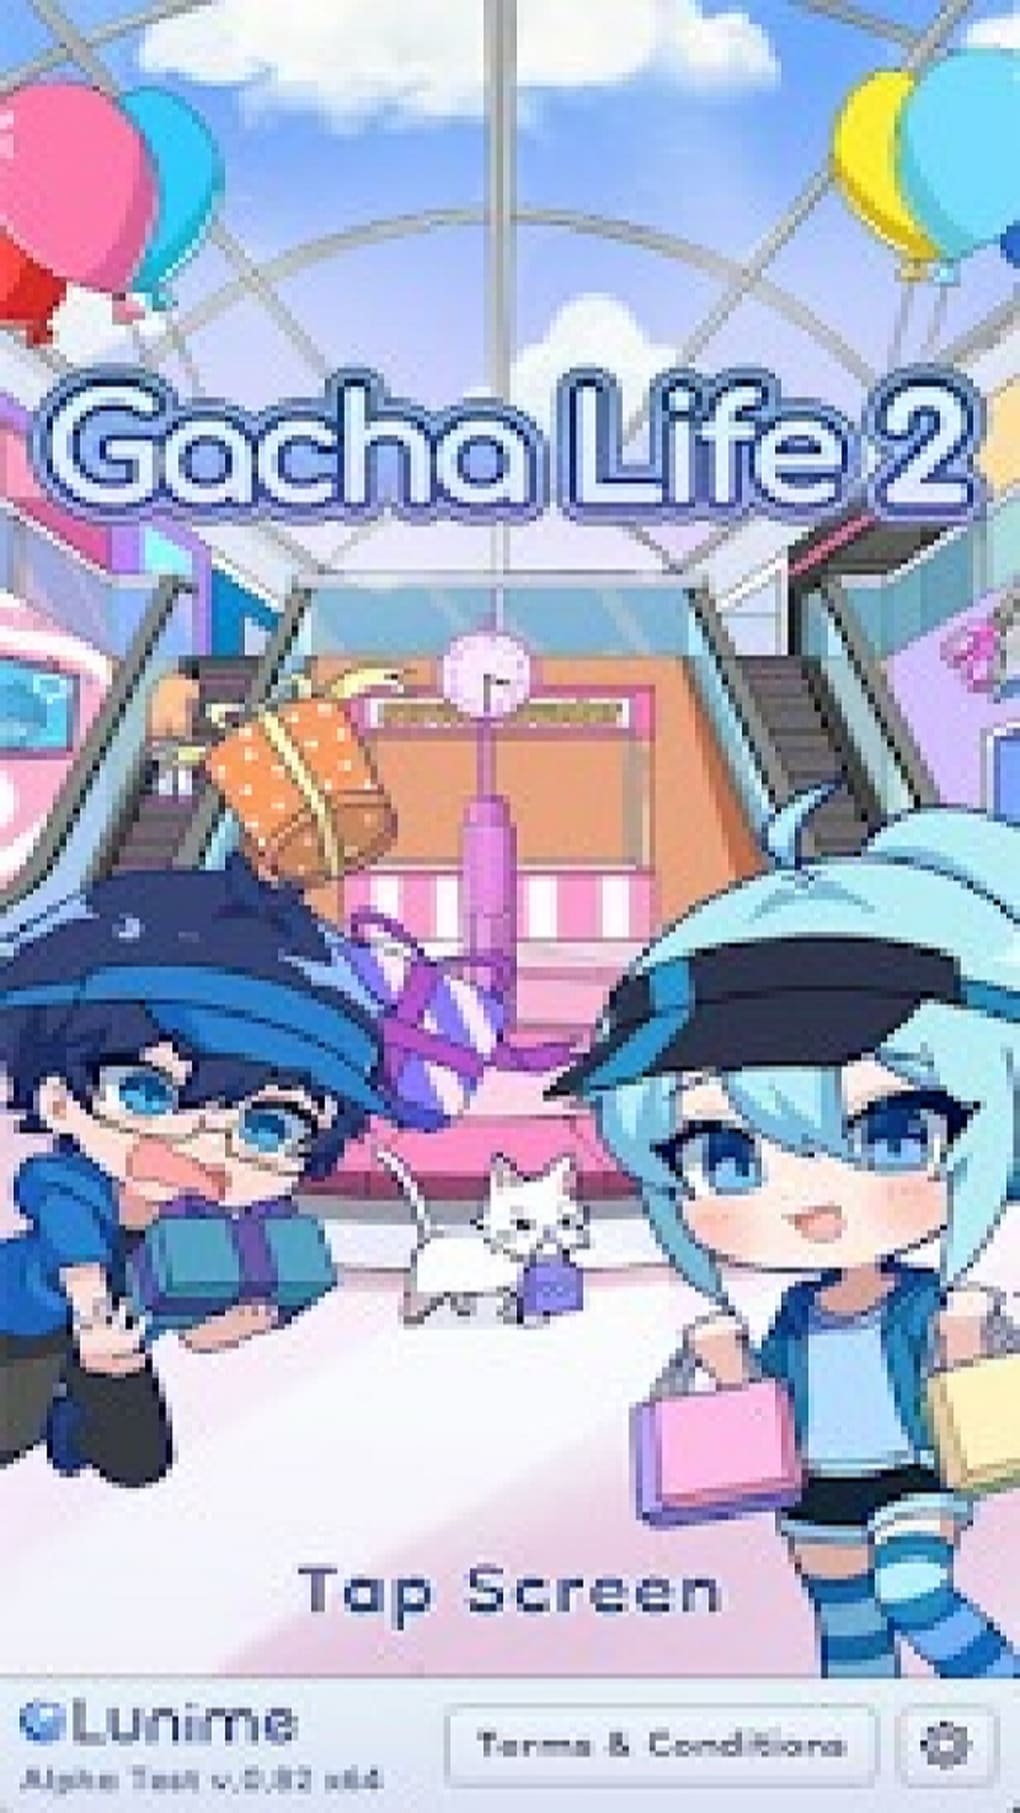 Face Ideas Gacha Life 2 for Android - Download